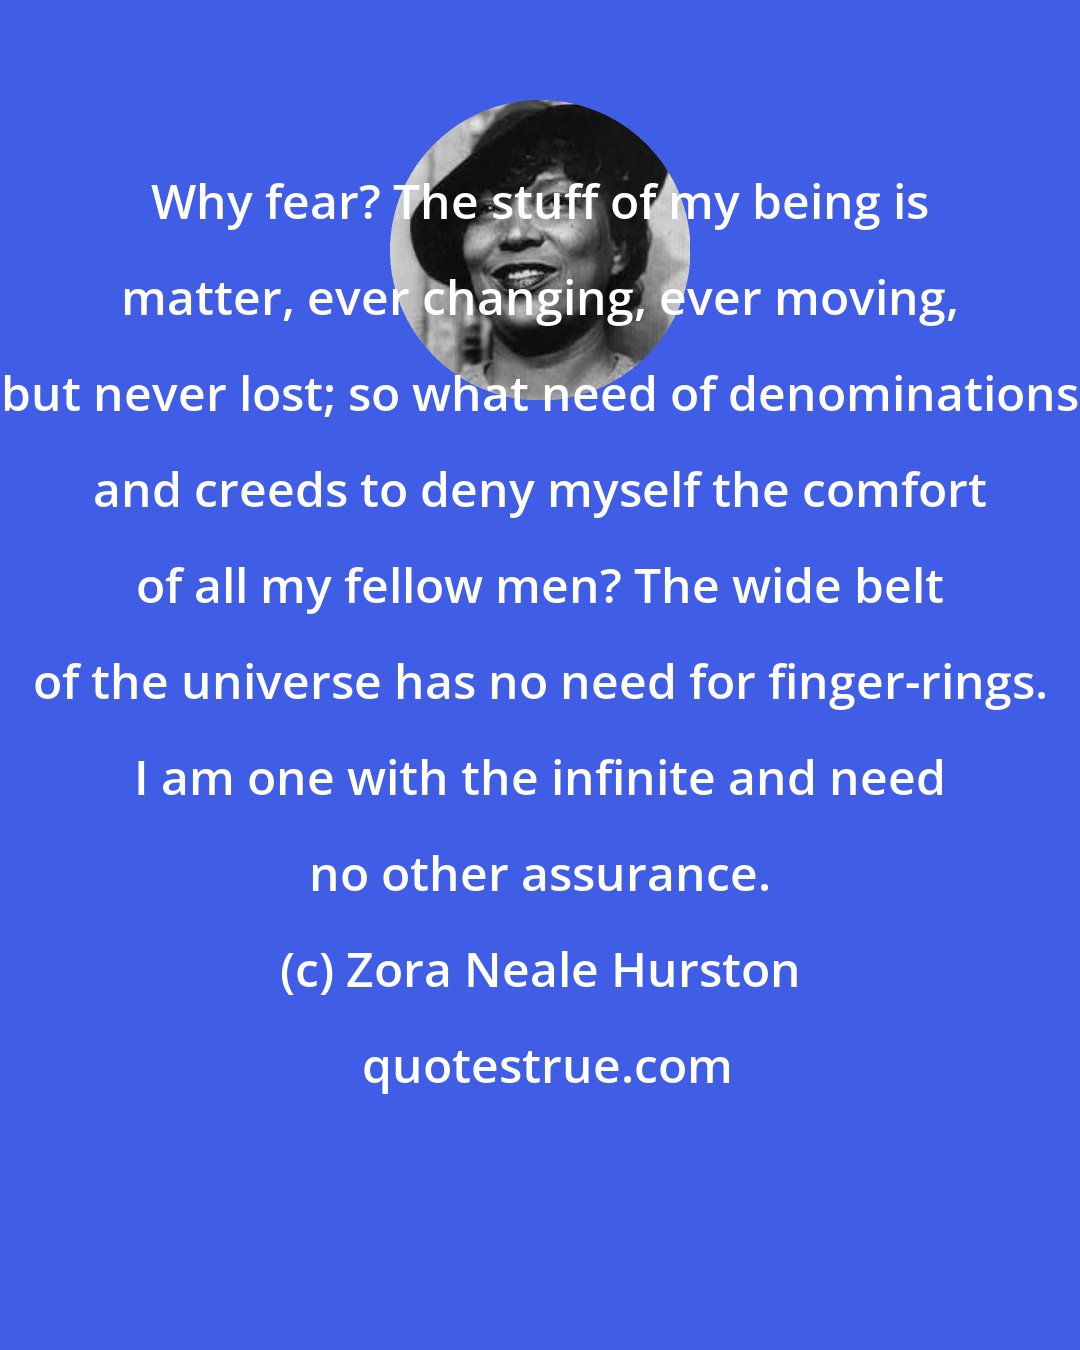 Zora Neale Hurston: Why fear? The stuff of my being is matter, ever changing, ever moving, but never lost; so what need of denominations and creeds to deny myself the comfort of all my fellow men? The wide belt of the universe has no need for finger-rings. I am one with the infinite and need no other assurance.